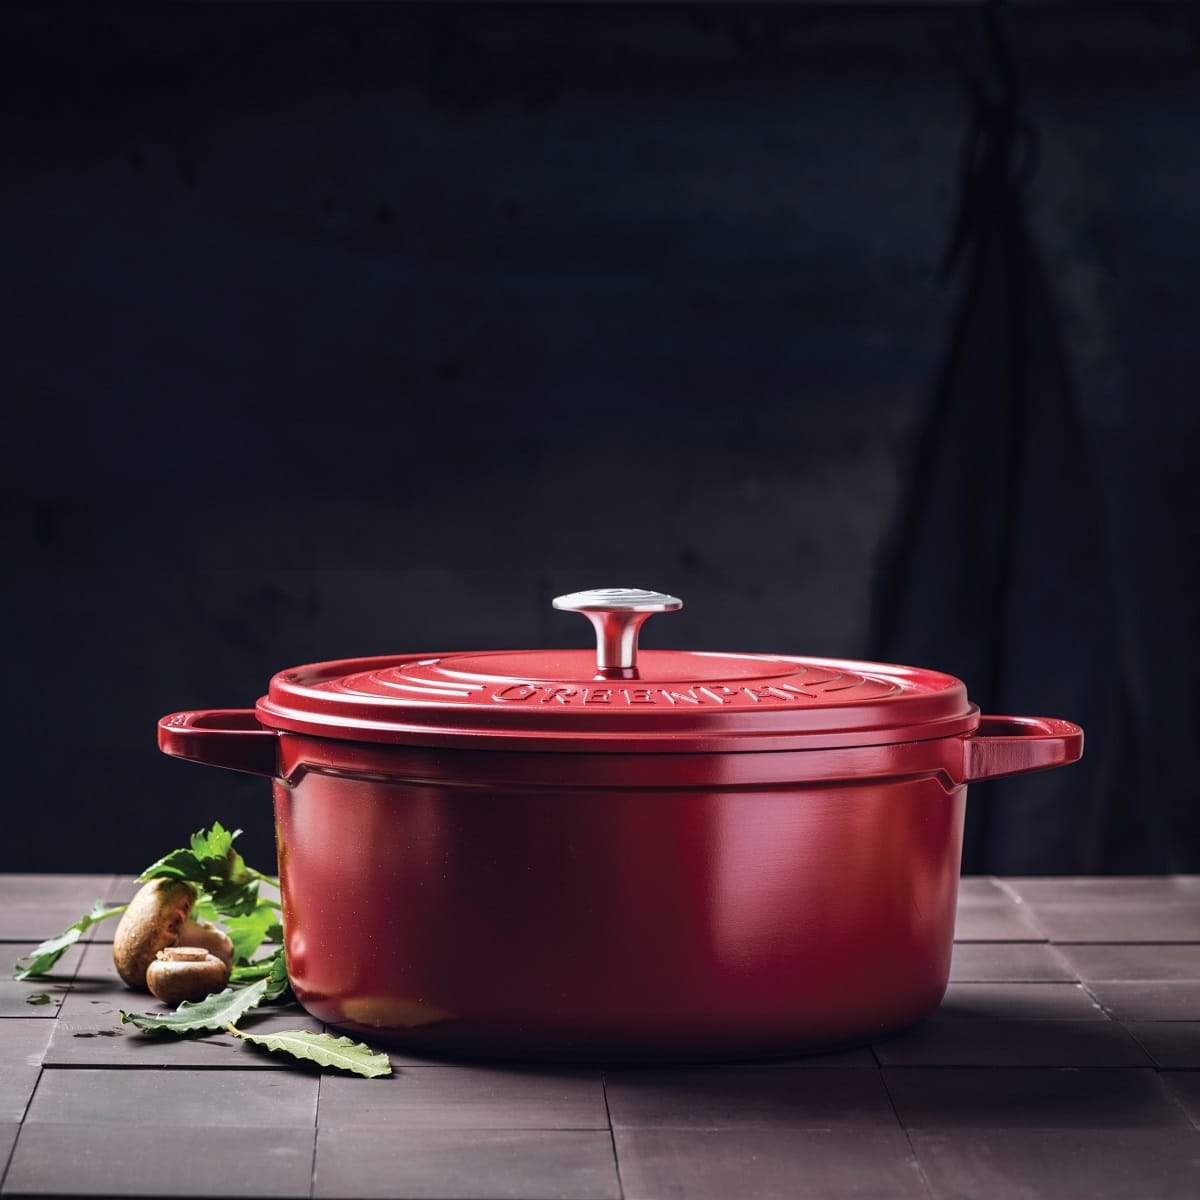 CC005554-001 - Featherweights Casserole with Lid, Scarlet Red - 24cm - Product Image 2